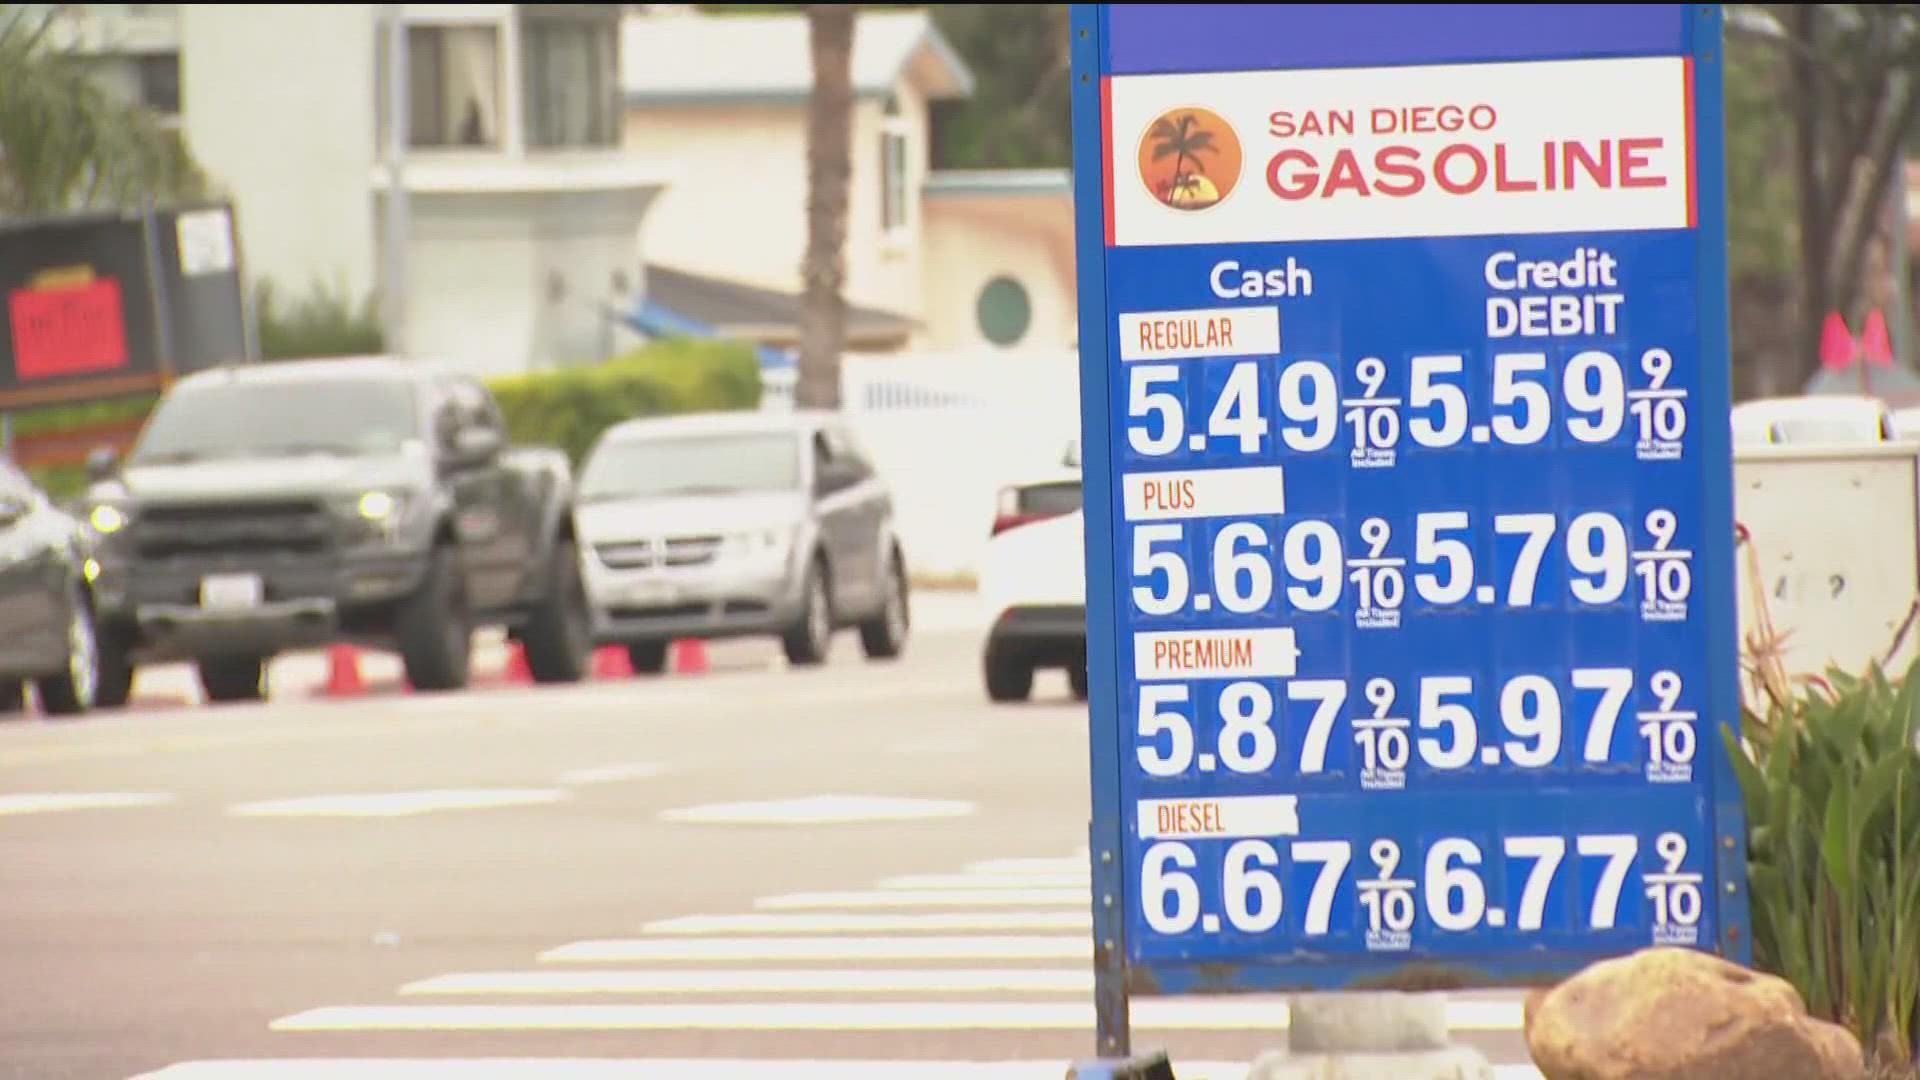 Gov. Newsom first proposed the idea of a gas tax rebate in March. Now, it's looking more like September or October.